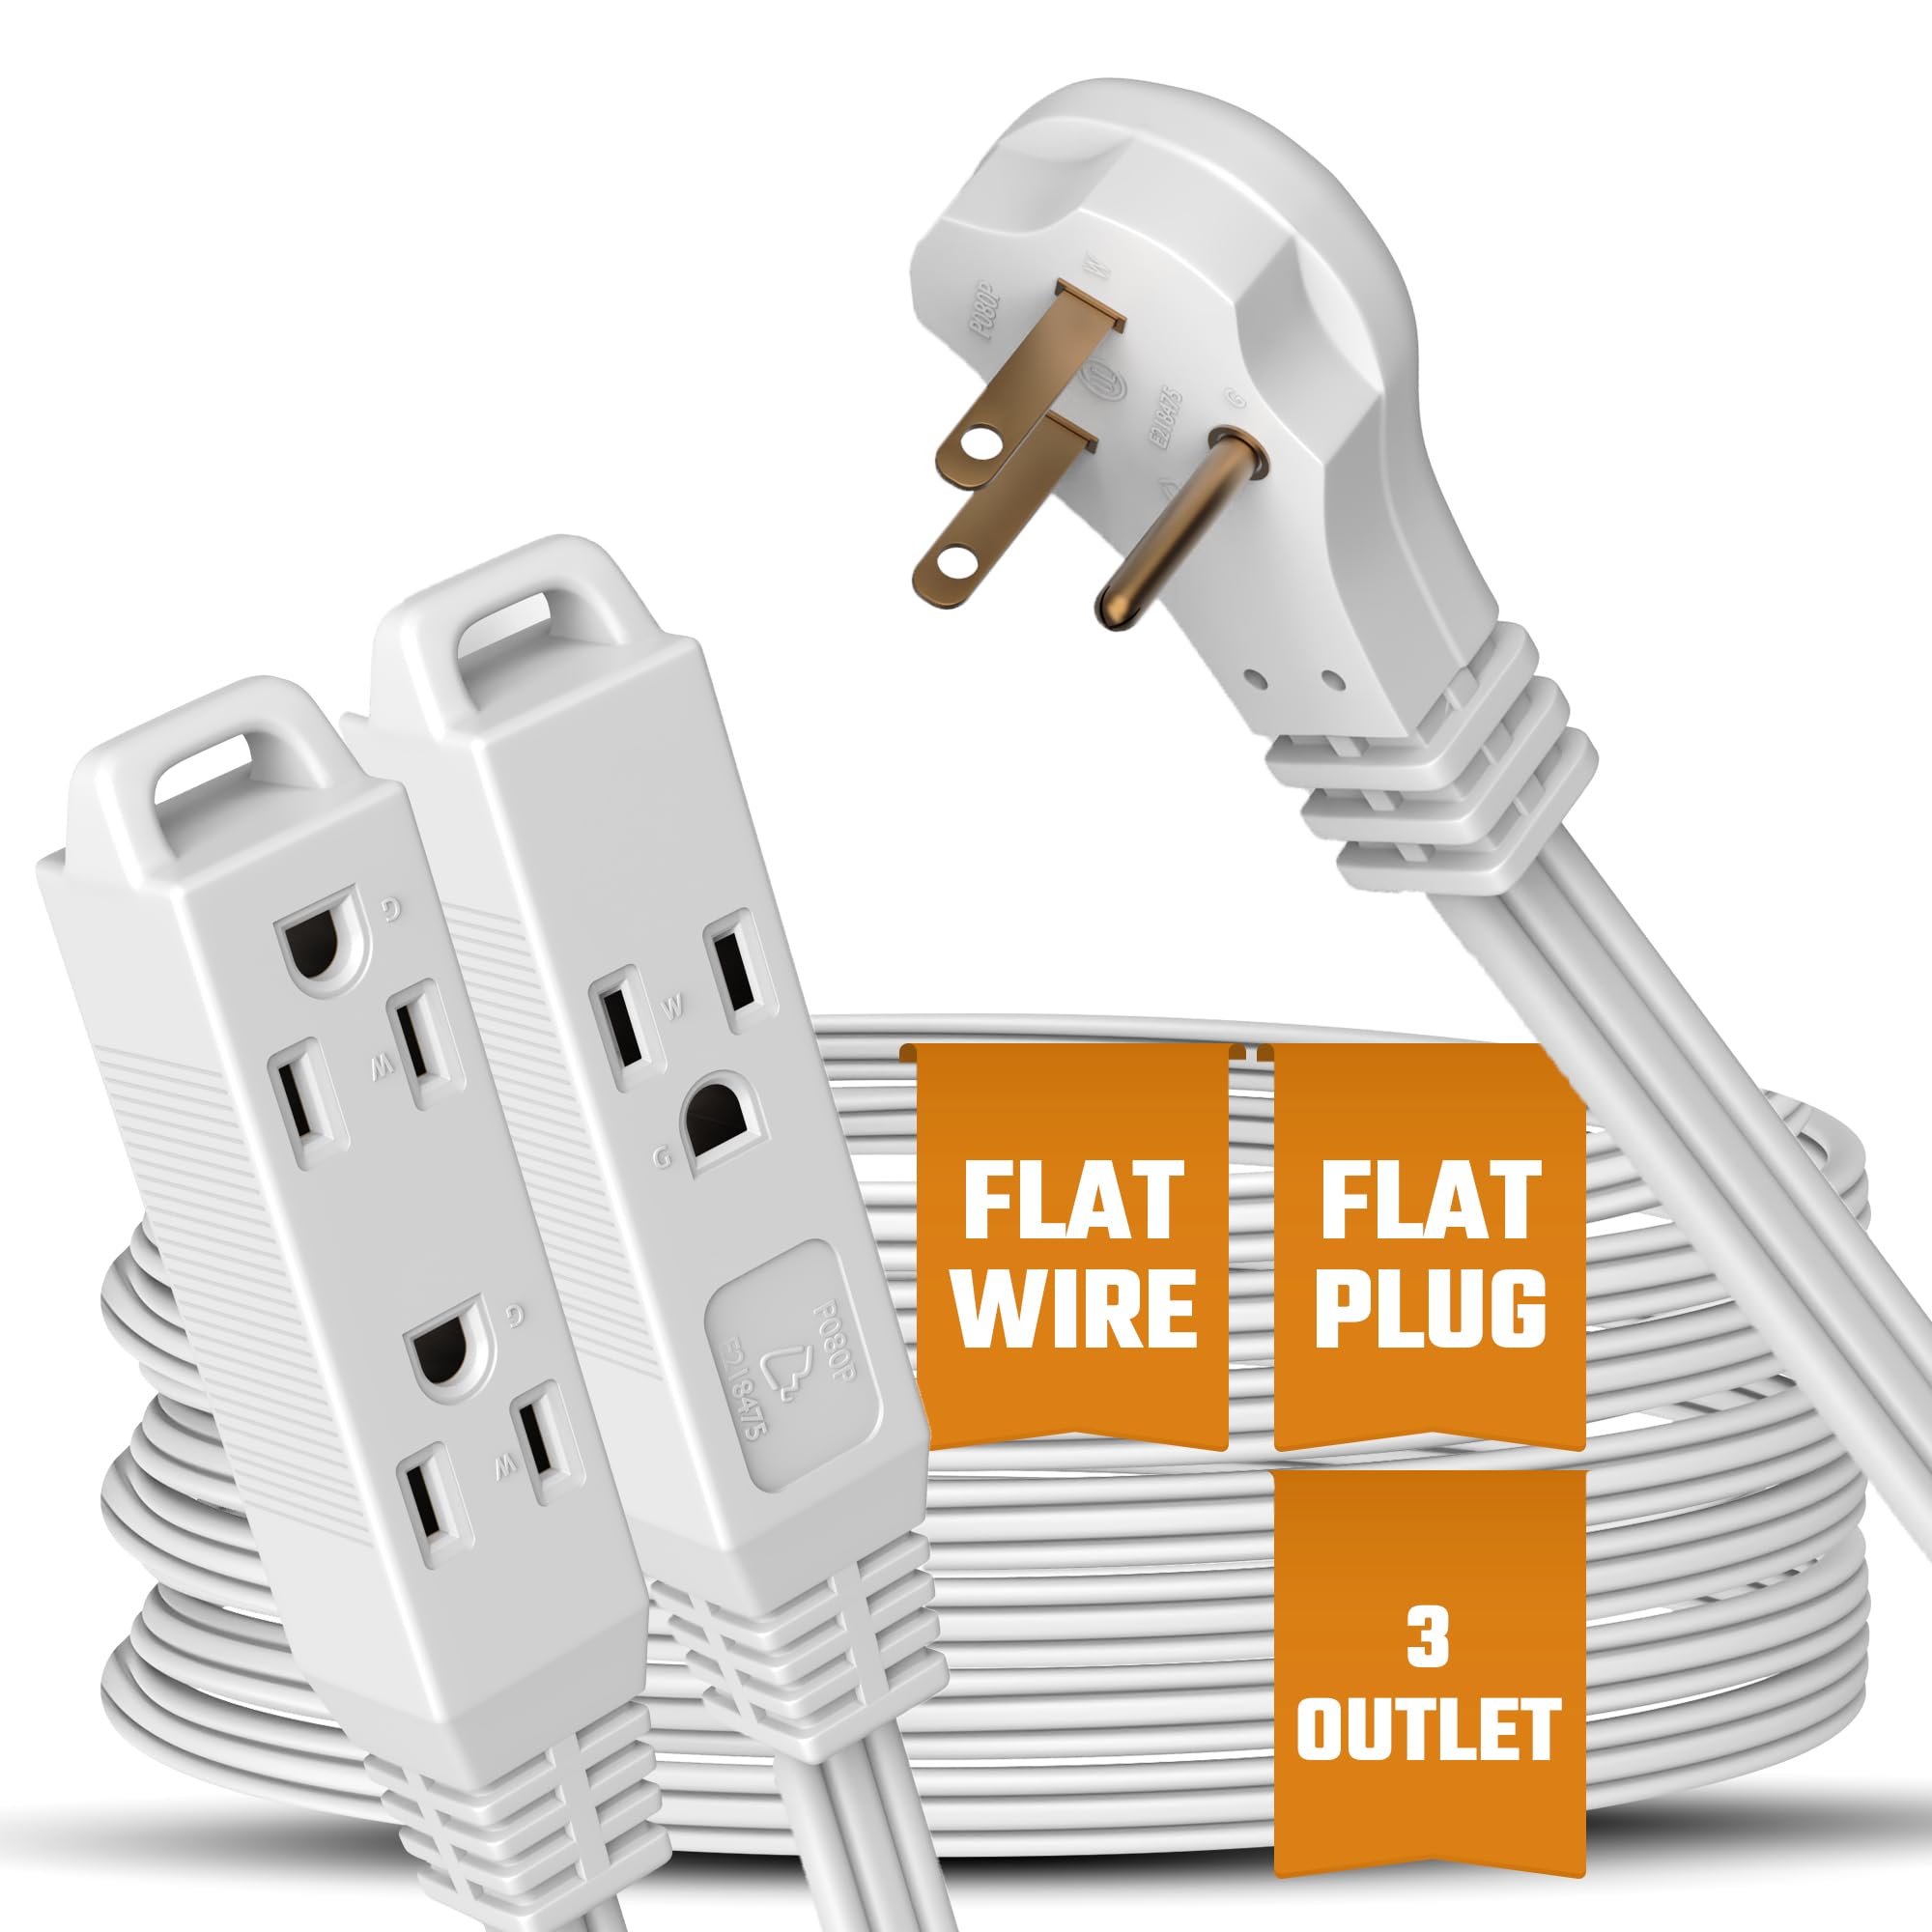 Flat 3-Outlet Extension Cord 15 Ft for Indoor Use by Bindmaster- UL-Listed 3-Prong Multi Extension Wire- Space-Saving Flat Angled Extension Cord  - Like New